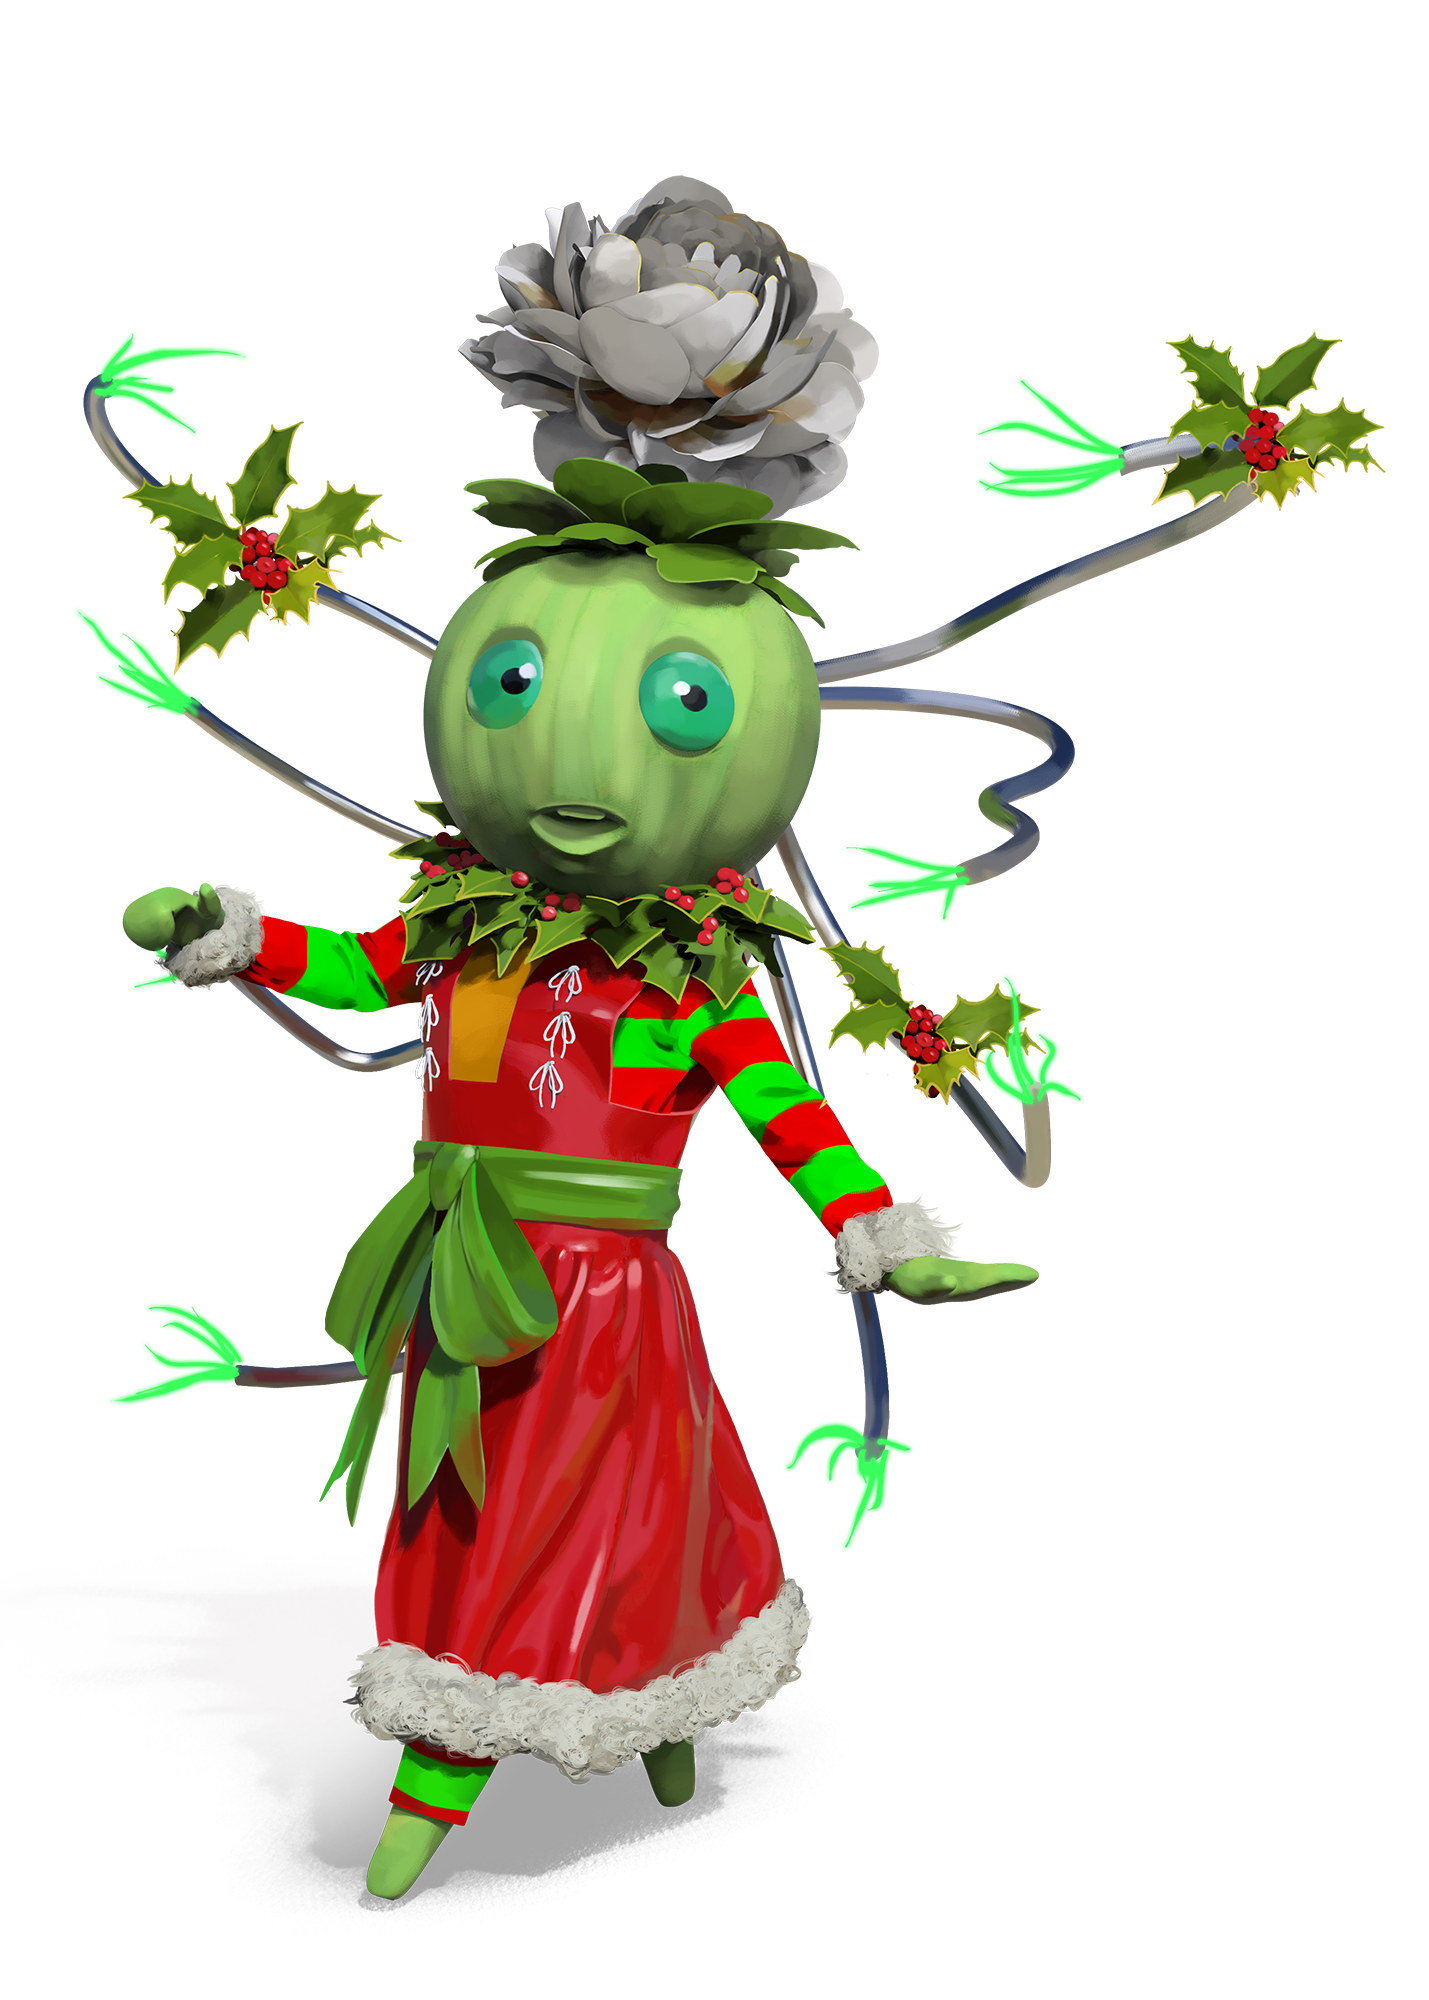 A cheery plant person dressed in festive attire with a white flower sprouting from their head.